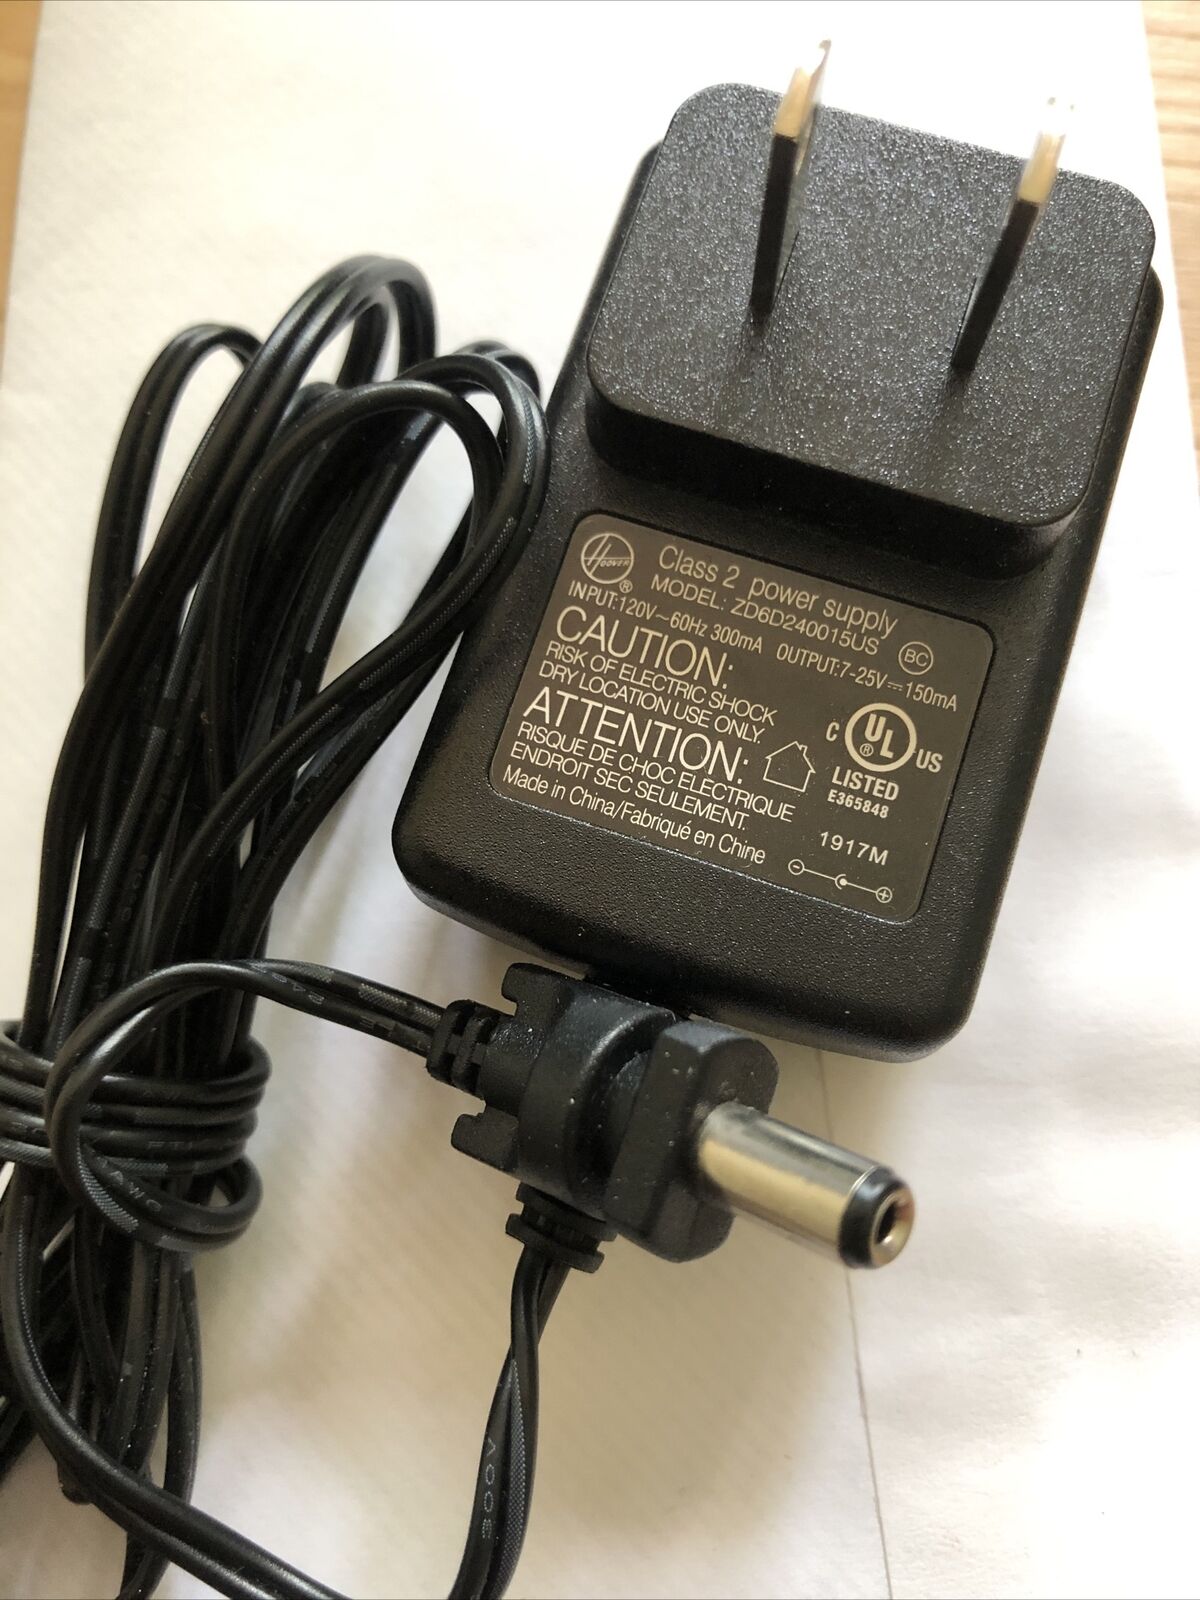 5FT AC Adapter 265 Hoover 440009553 YLJXA-T260040 power supply charger Brand: Hoover Type: AC/DC Adapter Compatible